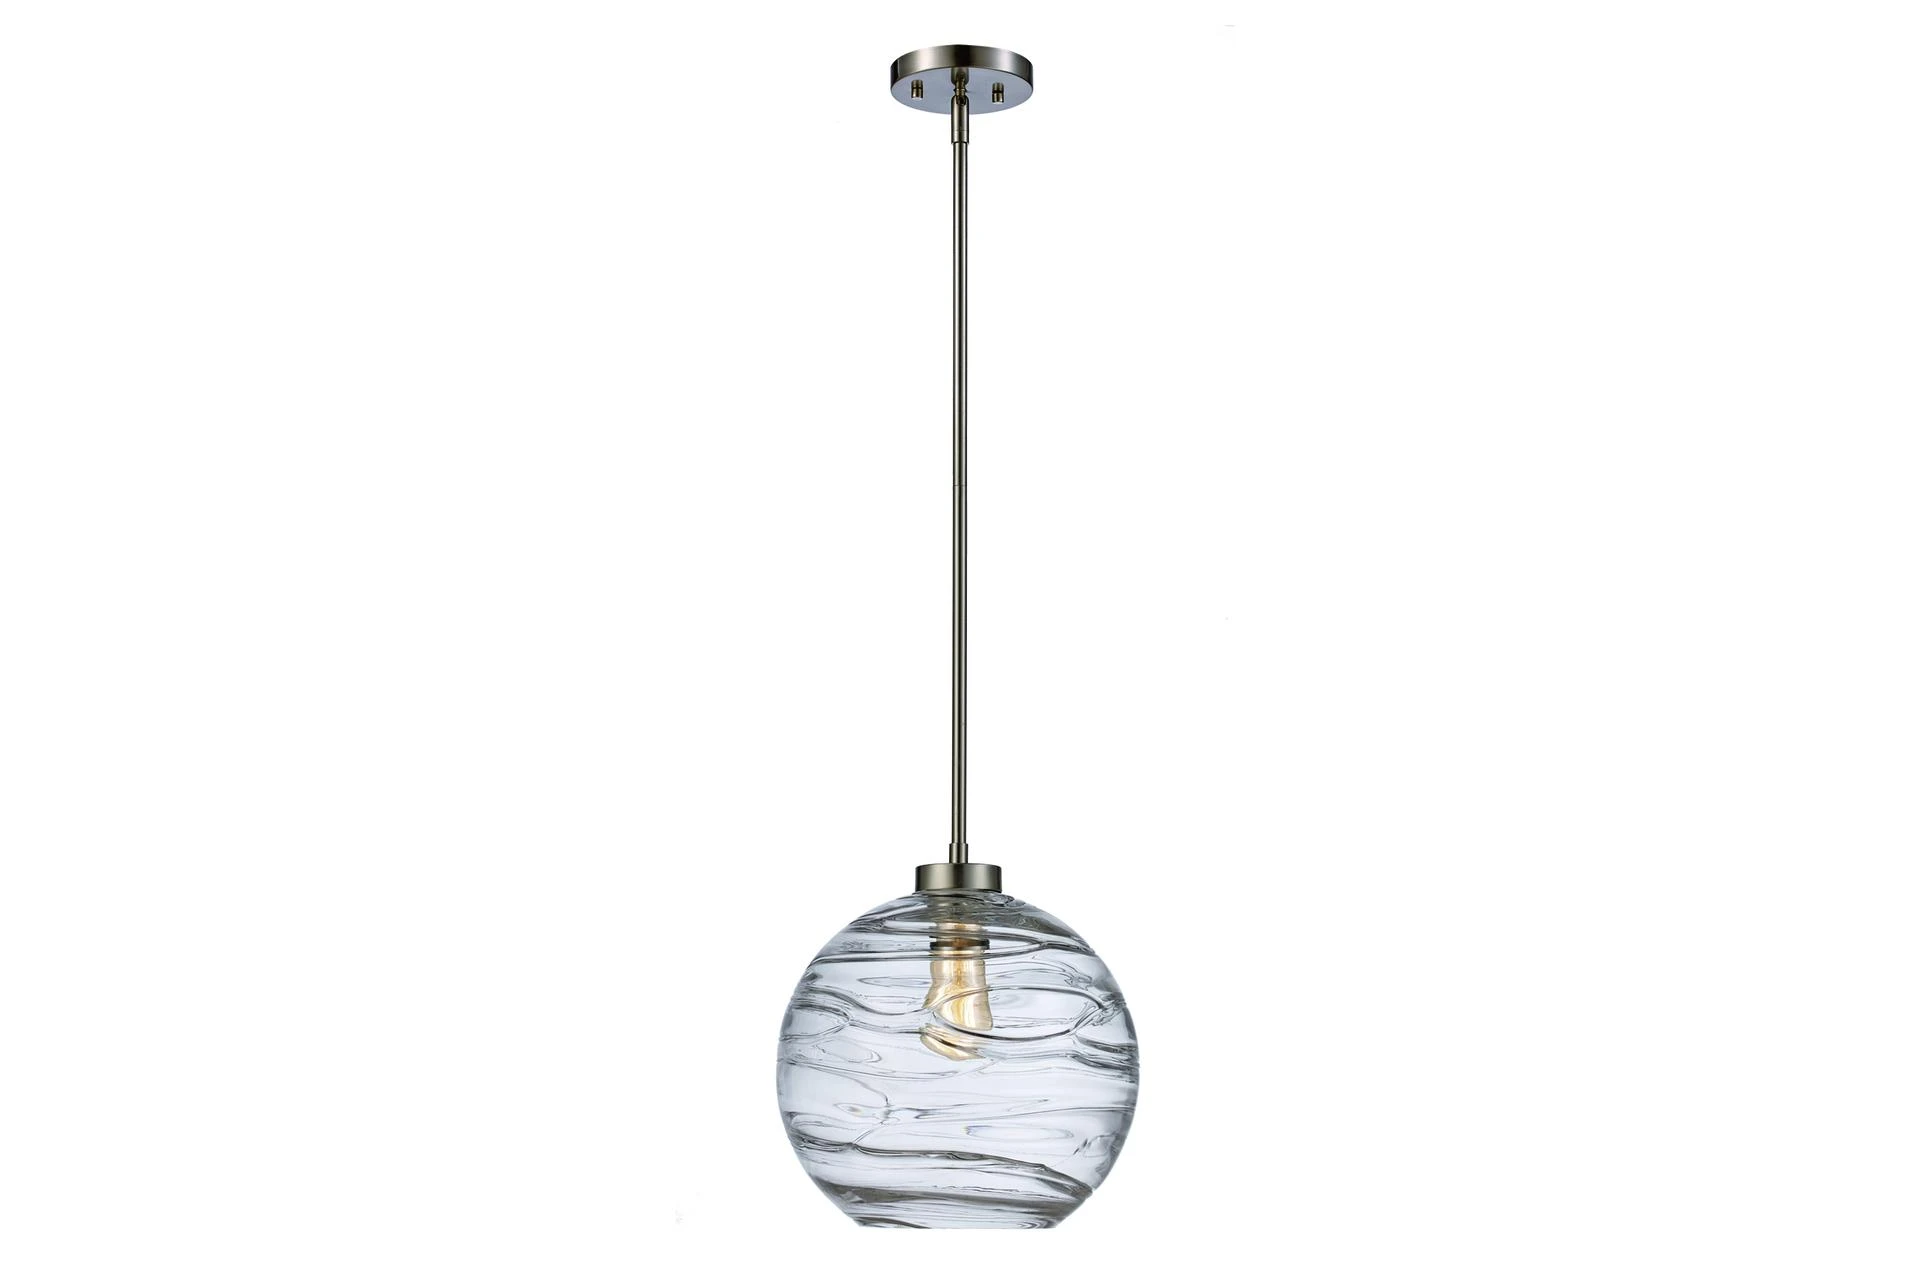 11.7X51.3 Brushed Nickel Glass Dome Pendant | Living Spaces